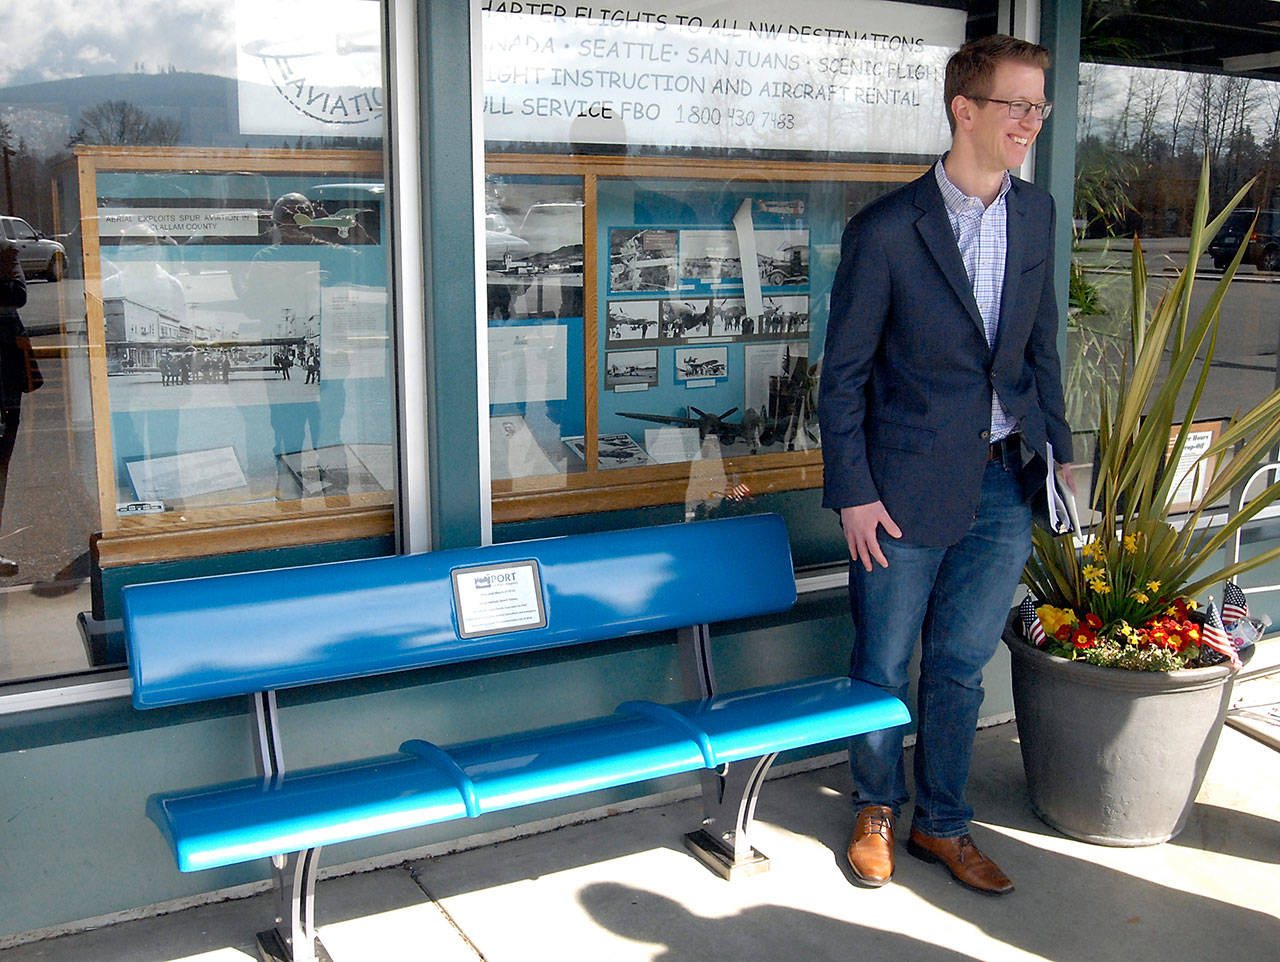 U.S. Rep. Derek Kilmer, D-Gig Harbor, stands next to a composite fiber bench dedicated to him for his efforts on legislation which secured government funding to keep the full runway open at William R. Fairchild International Airport in Port Angeles during Kilmer’s visit with community leaders at the airport. (Keith Thorpe/Peninsula Daily News)